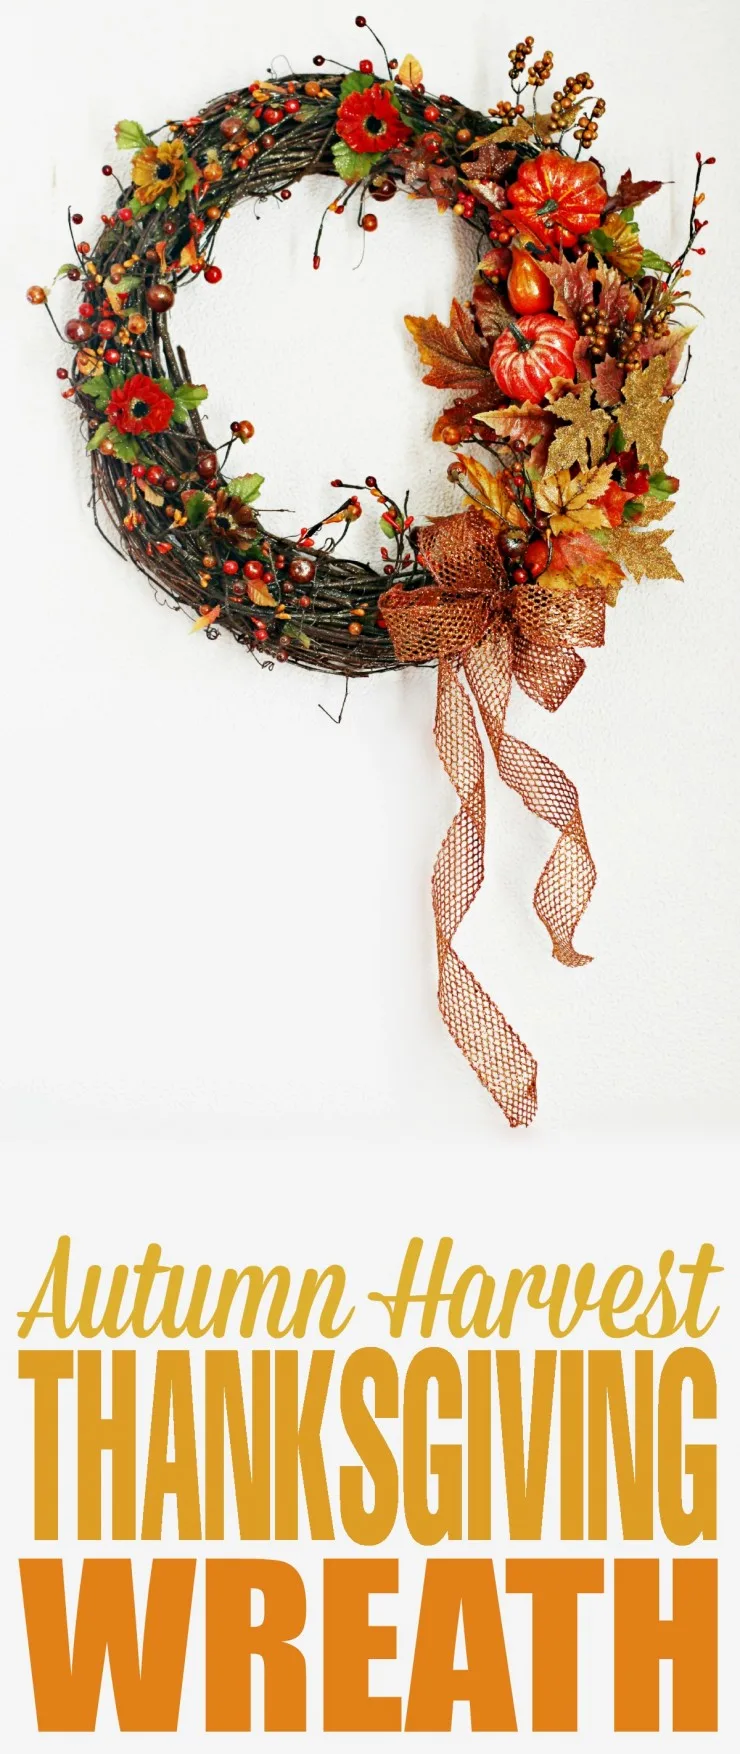 This Autumn Harvest Thanksgiving Wreath is a an easy craft project with fabulous results. It looks great handing on a wall or front door!